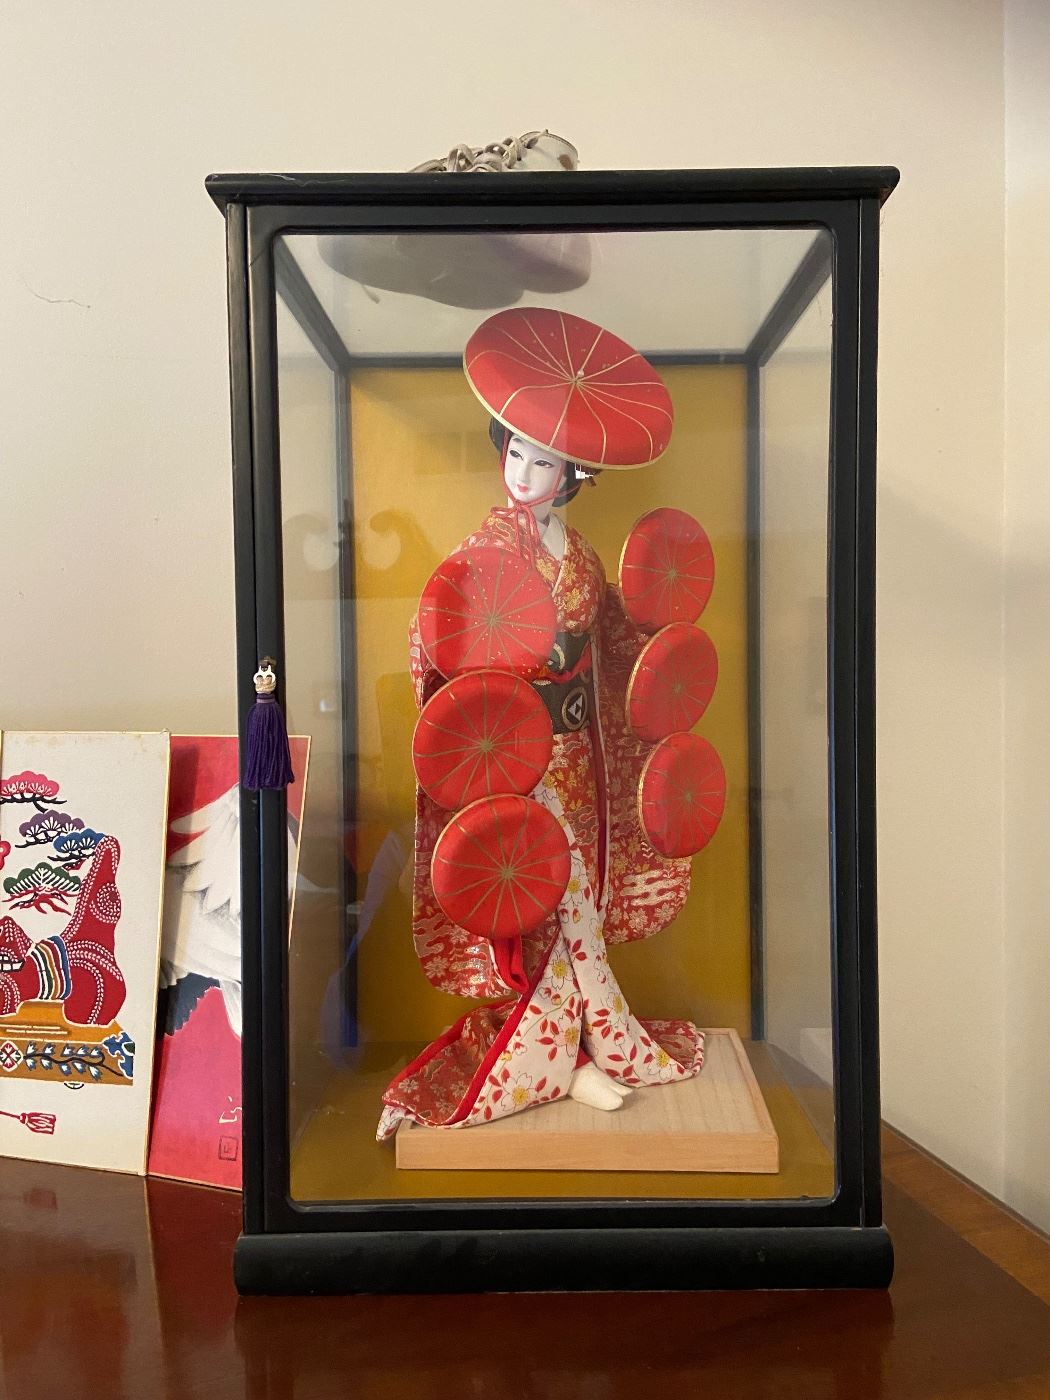 Japanese Geisha porcelain doll in case.  There are several other beautiful geisha girls along with a variety of other oriental treasures throughout the house.  And of course we are loaded with households, furniture, appliances and lots of other great stuff. 